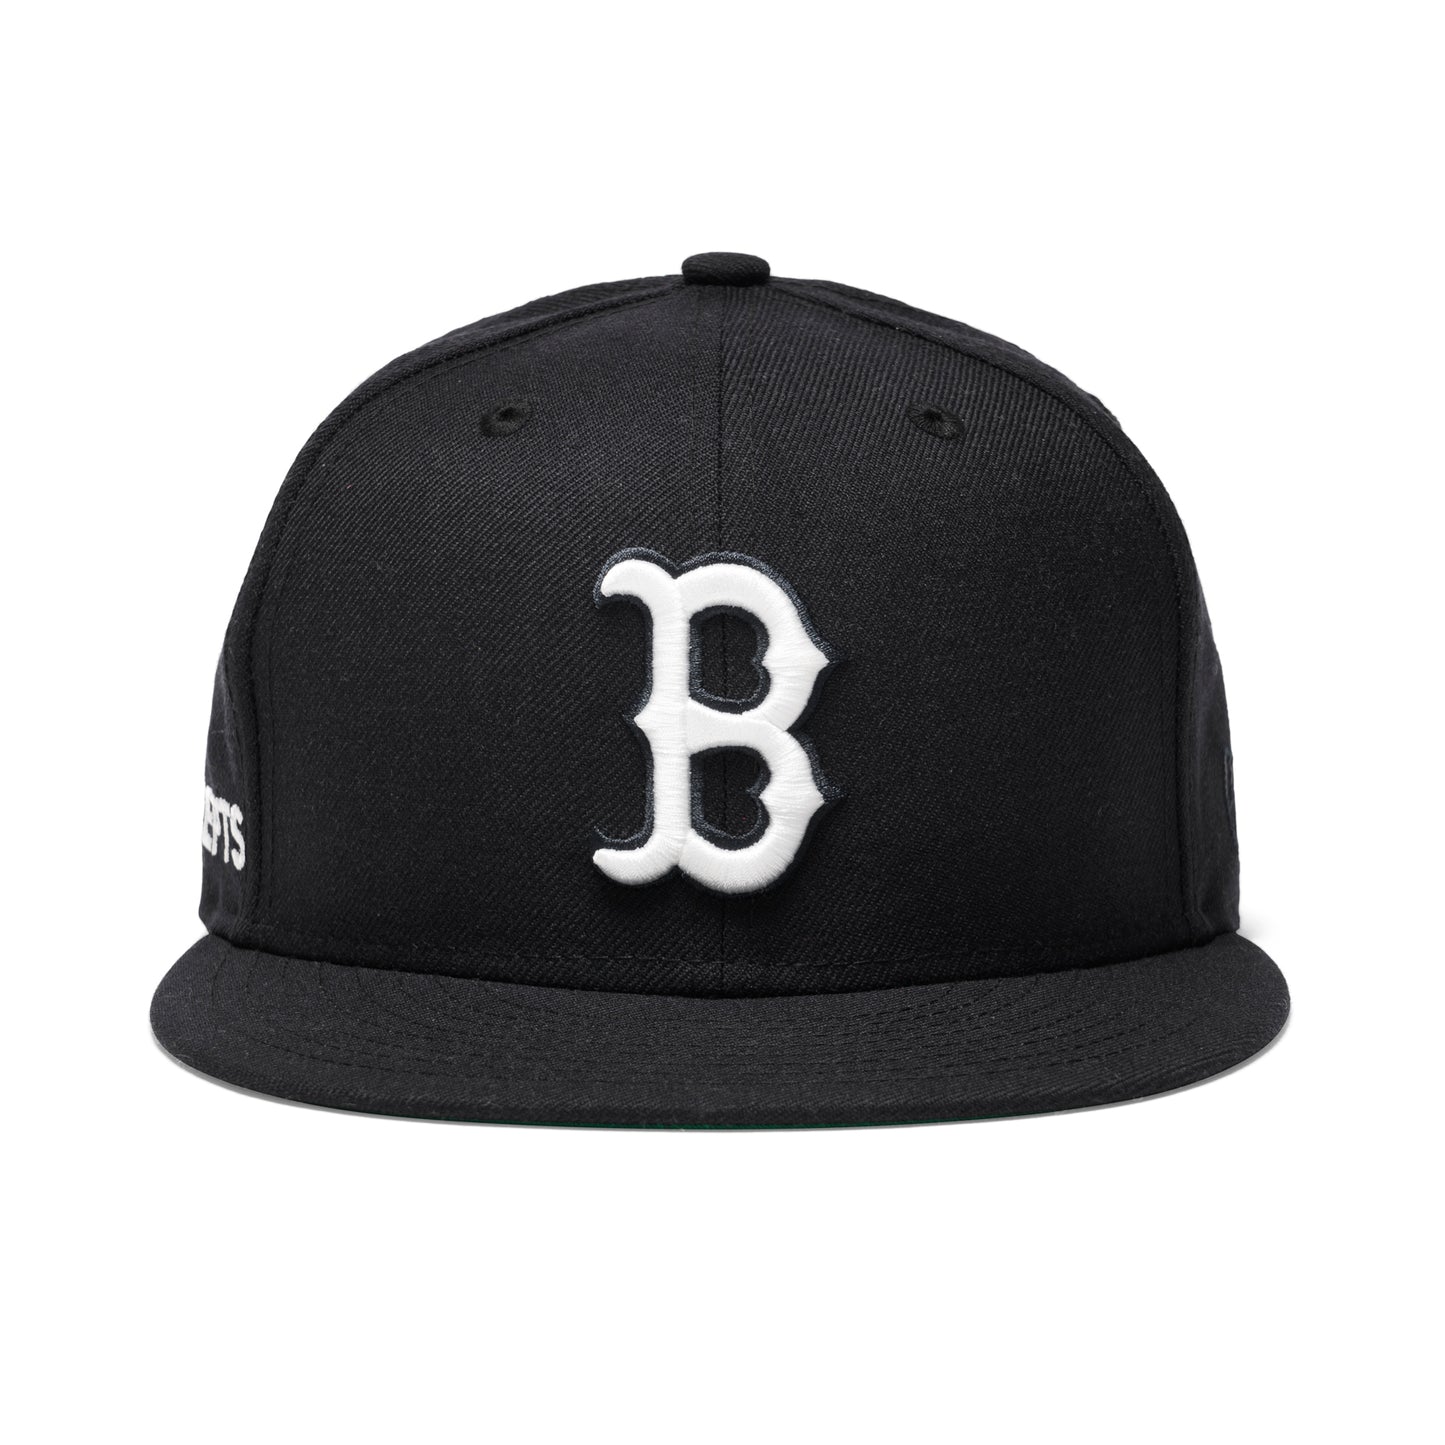 Concepts x New Era 5950 Boston Red Sox Fitted Hat (Black)